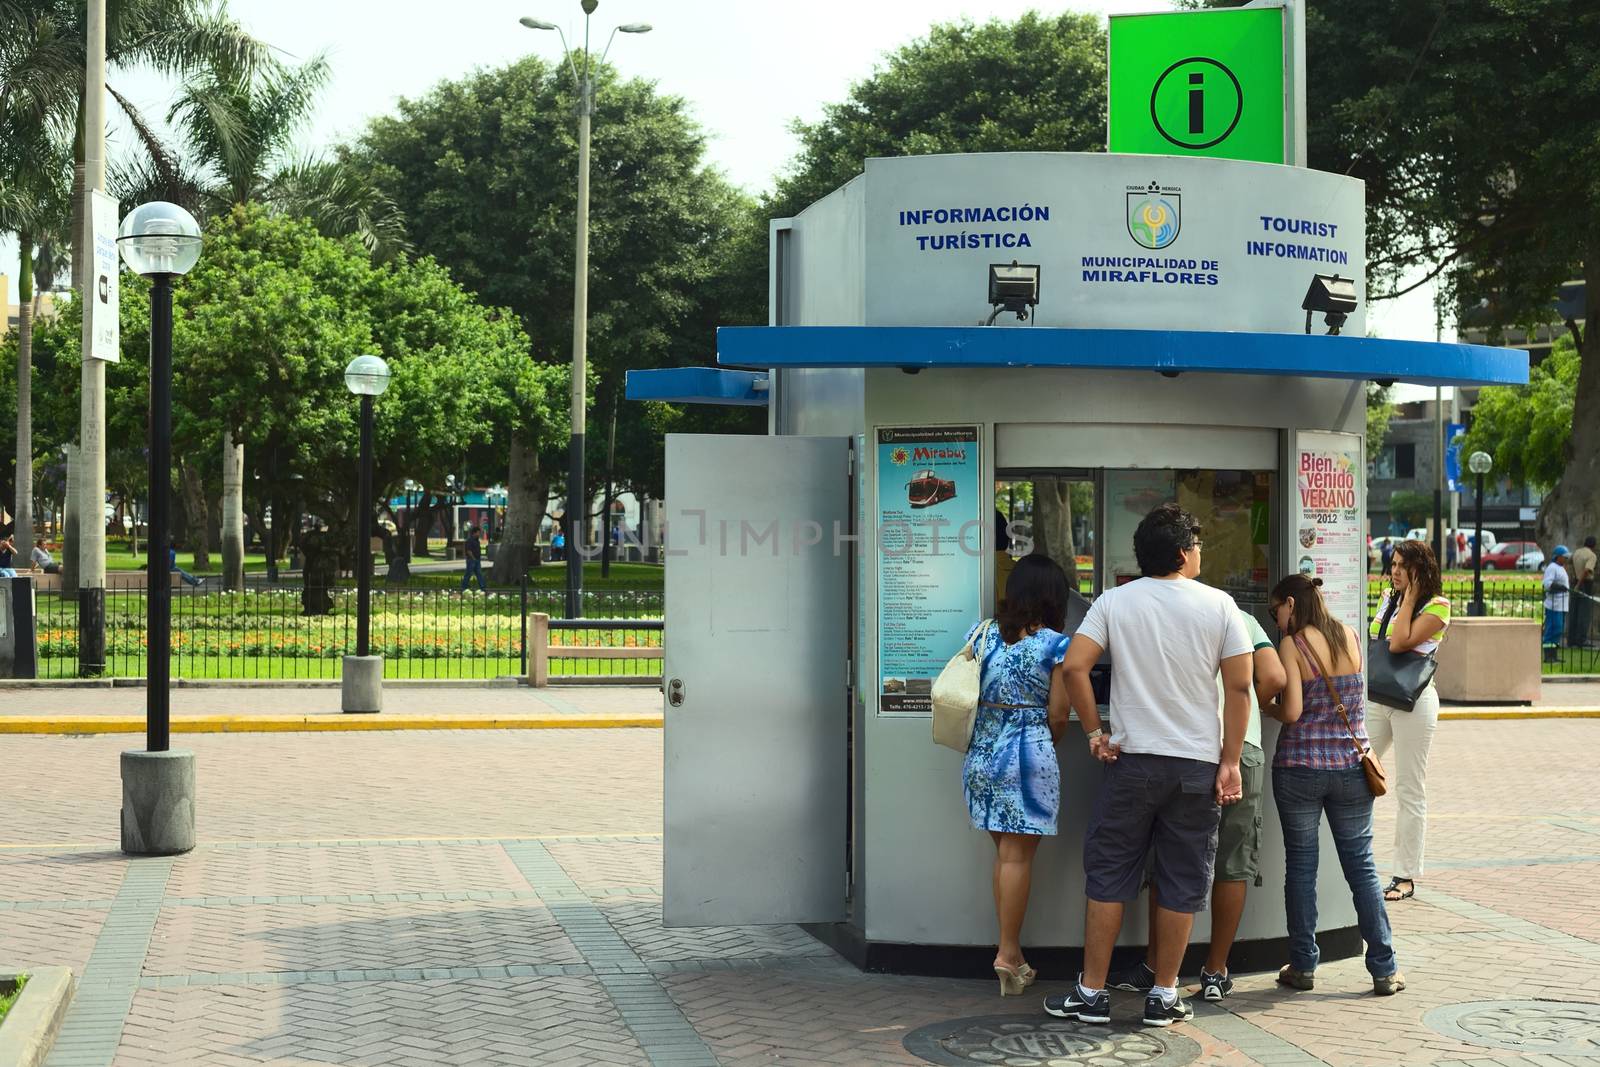 LIMA, PERU - FEBRUARY 11, 2012: Unidentified people at the tourist information at the Kennedy Park in the district of Miraflores on February 11, 2012 in Lima, Peru. Miraflores is the most touristy district of Lima, which has the most infrastructure for tourism.  